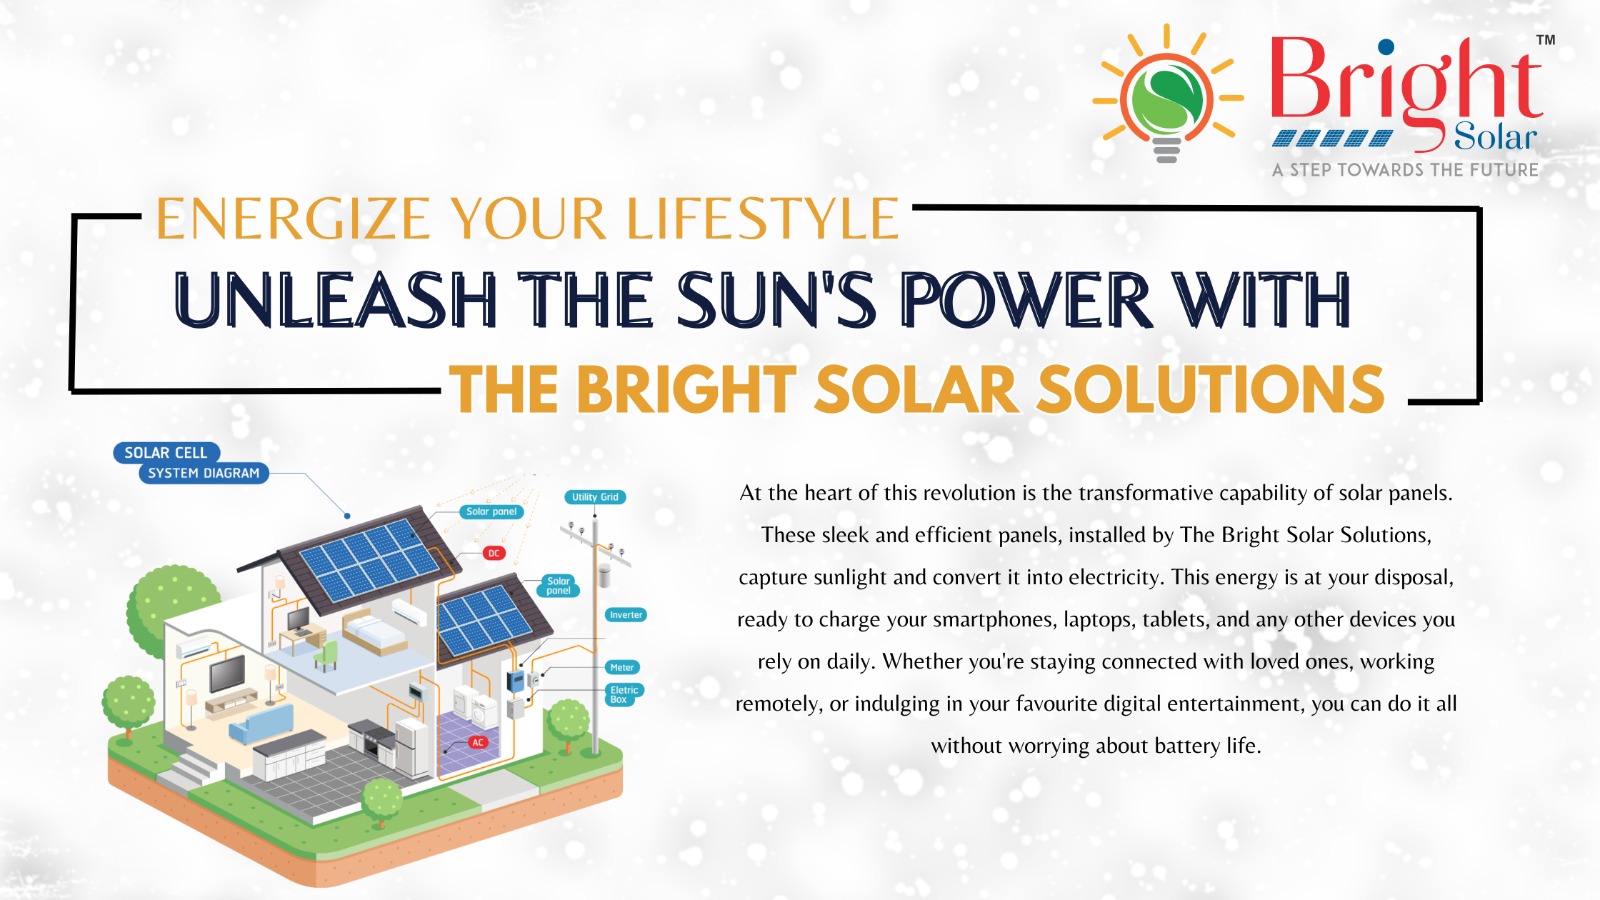 Energize Your Lifestyle: Unleash the Sun’s Power with The Bright Solar Solutions